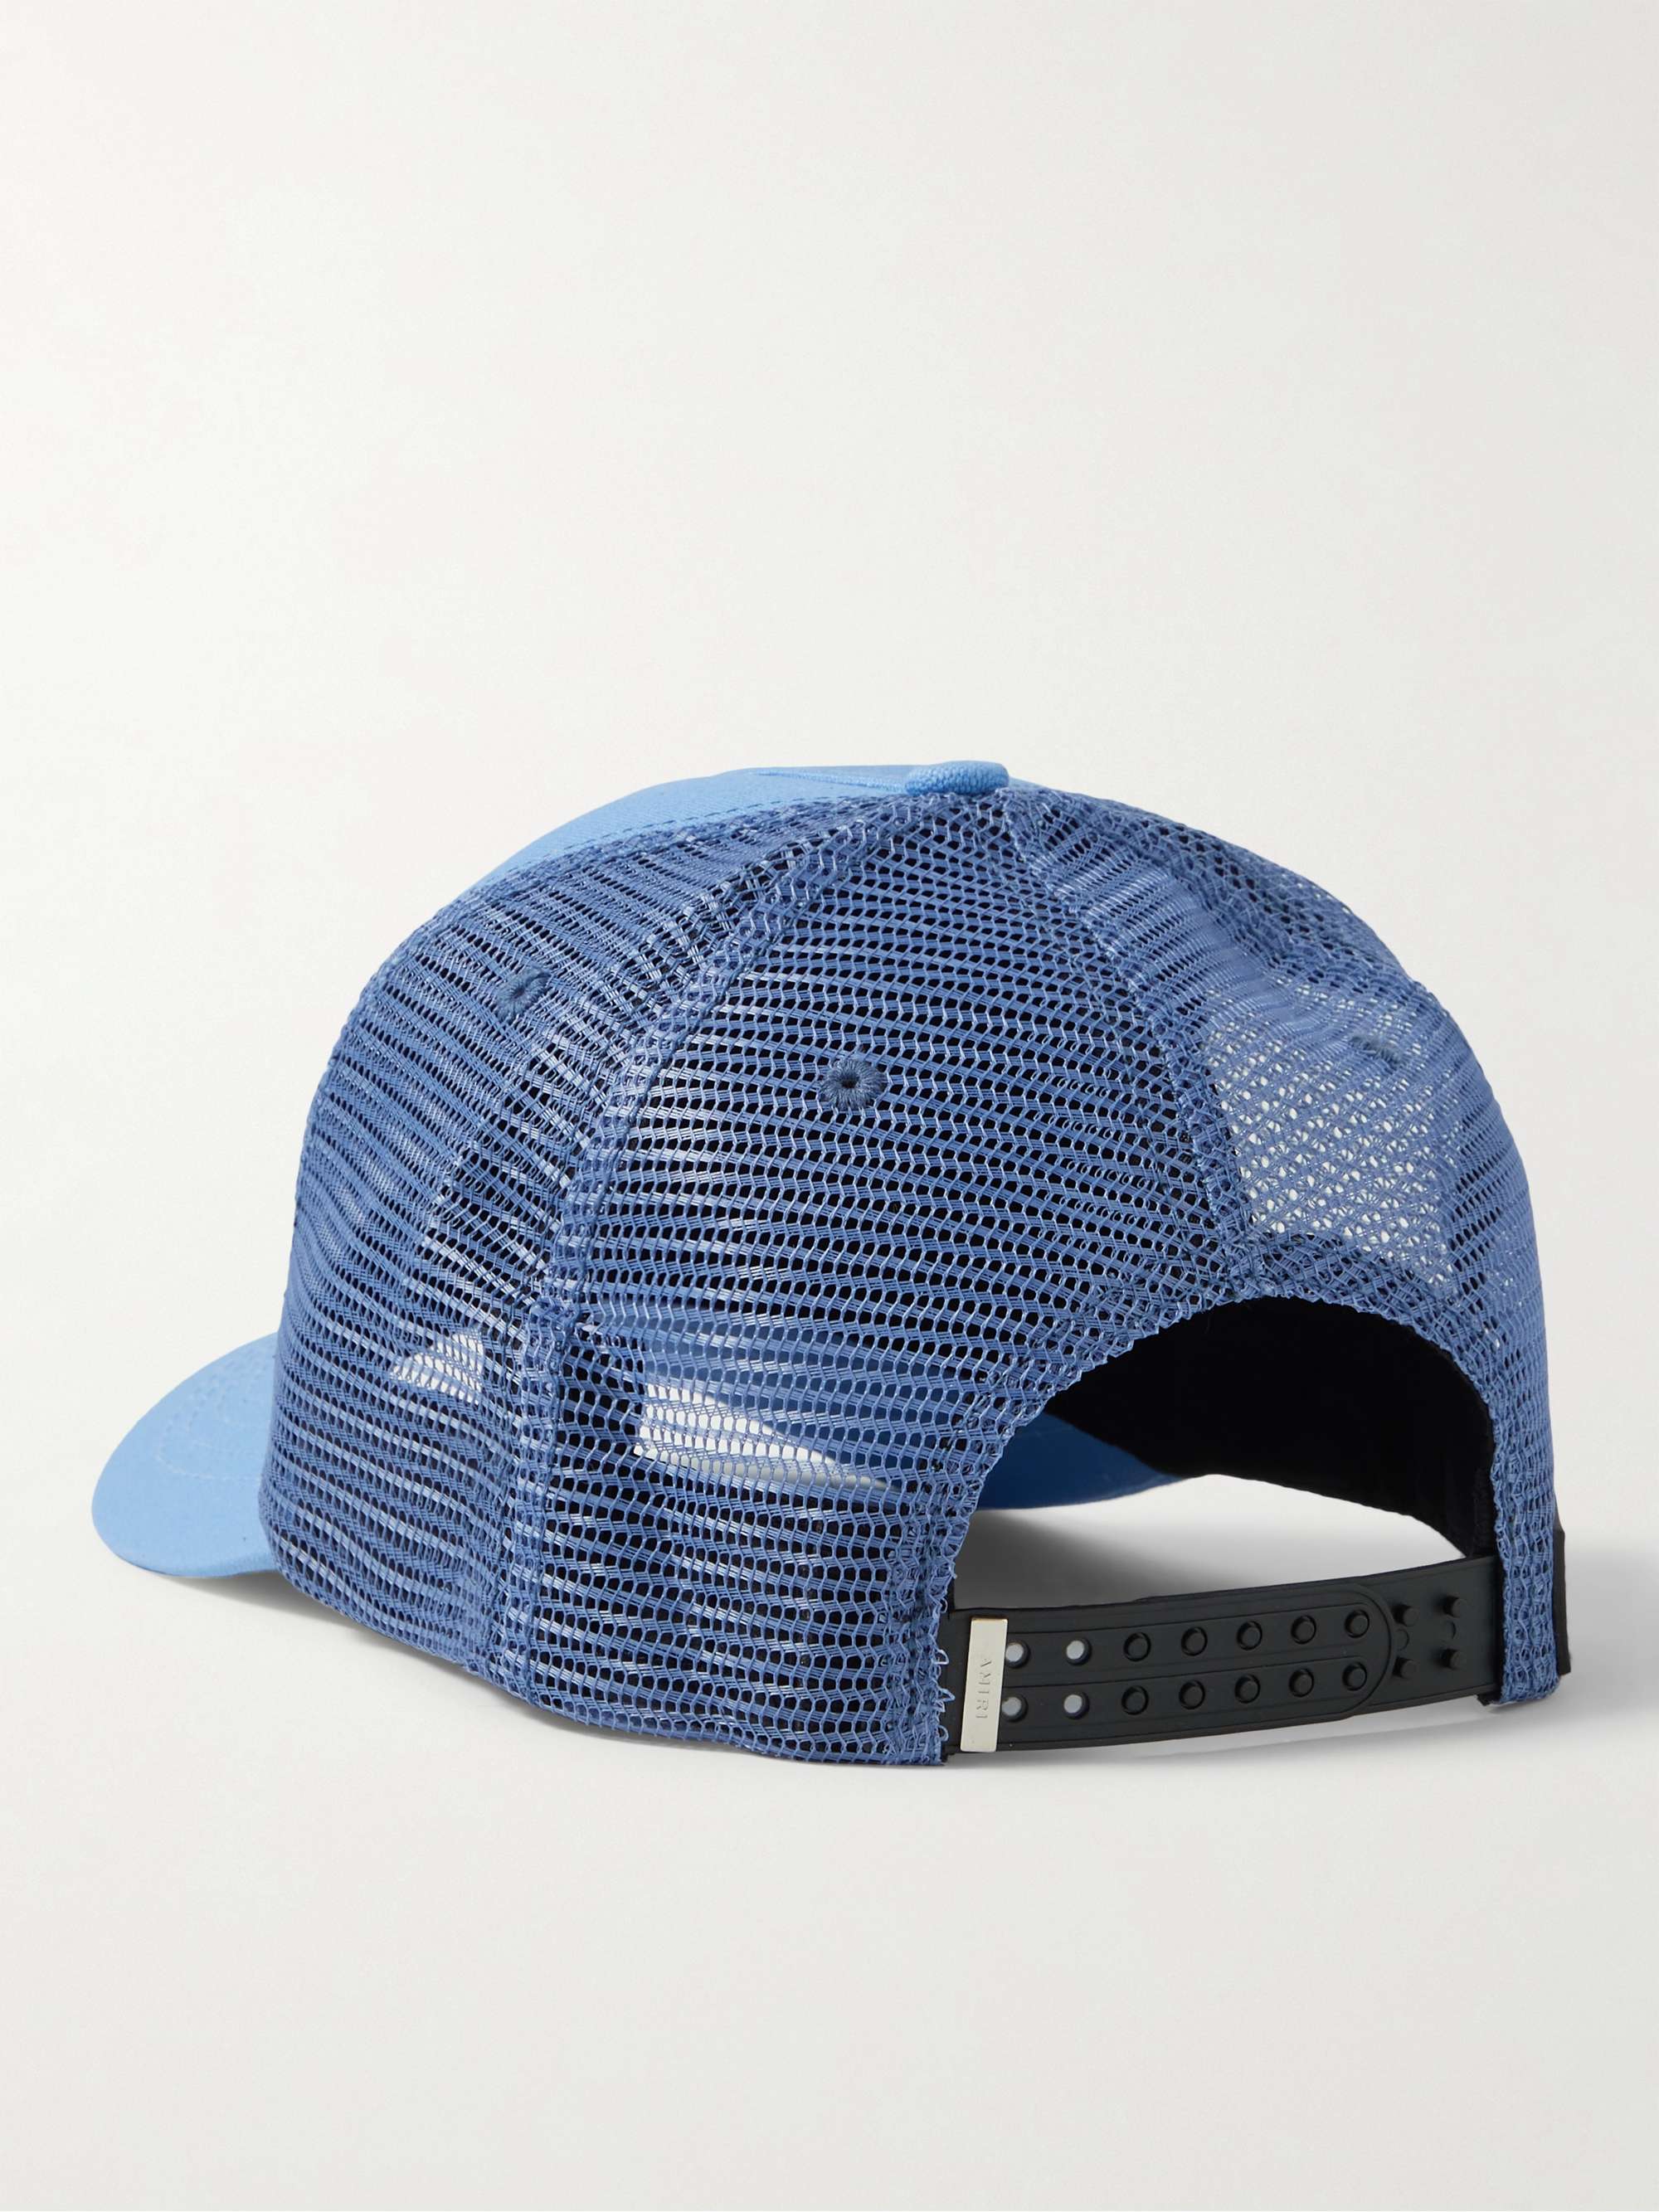 AMIRI Leather-Trimmed Cotton-Canvas and Mesh Trucker Cap